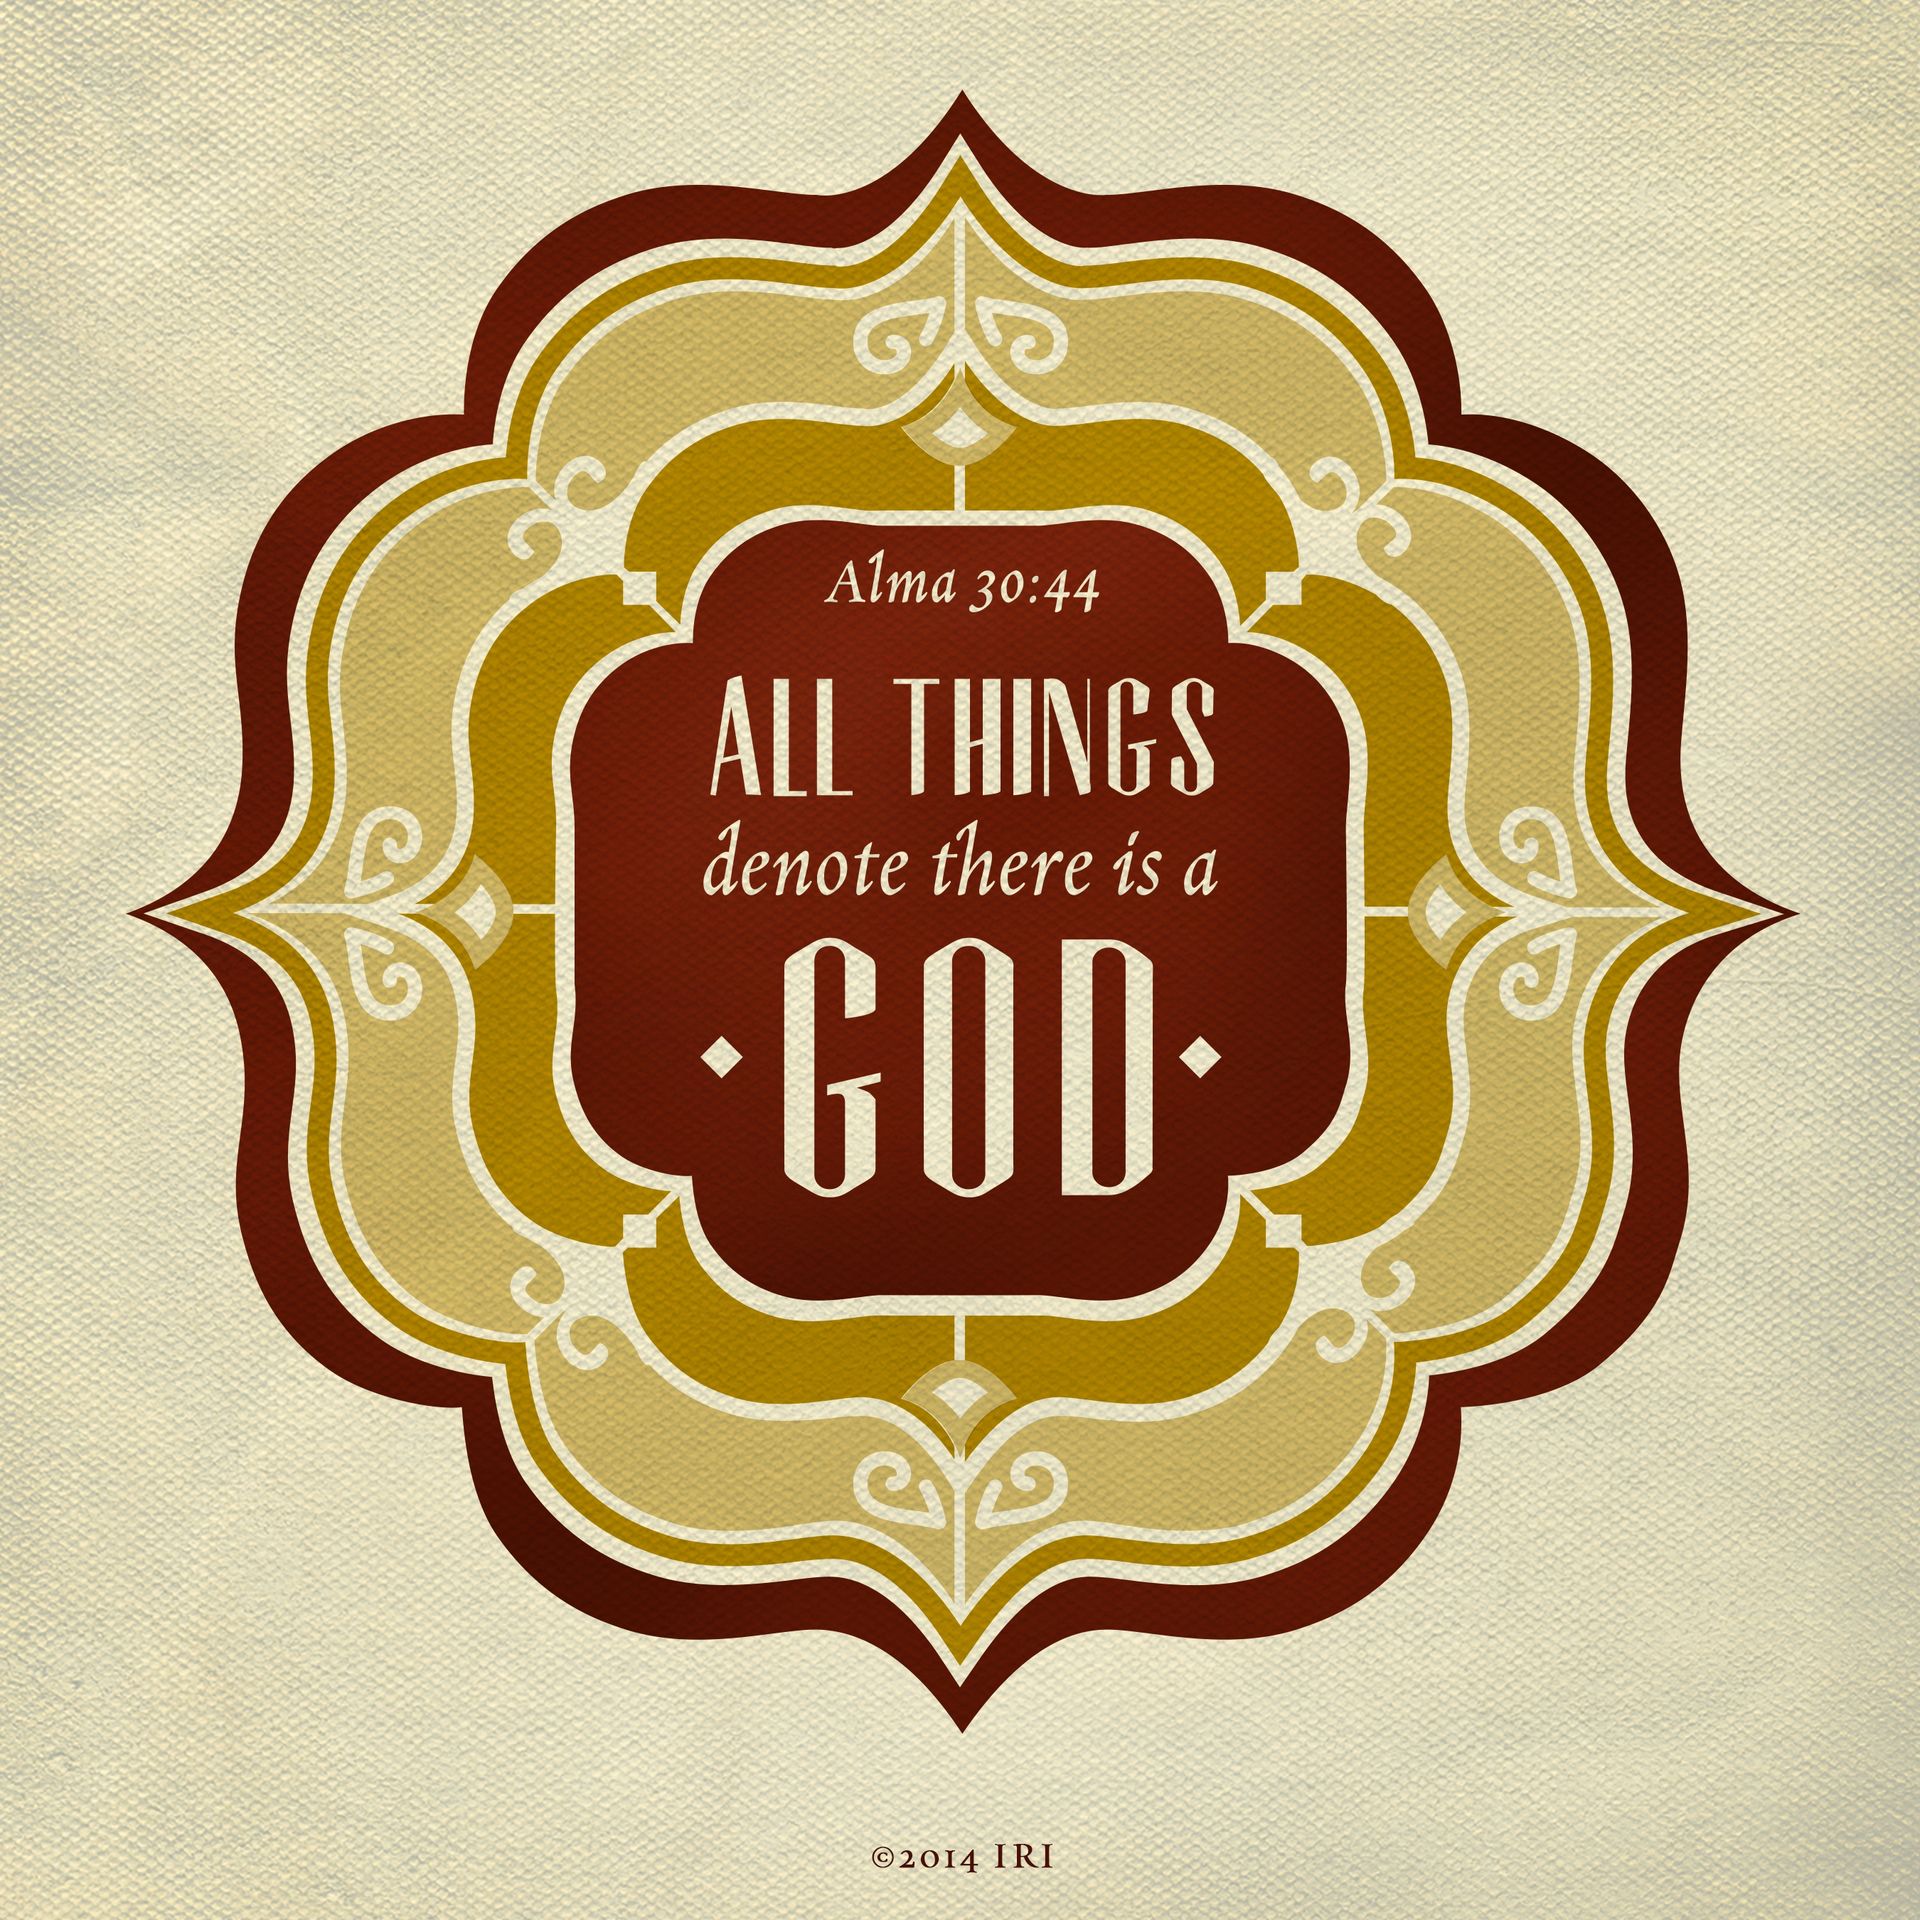 “All things denote there is a God.”—Alma 30:44